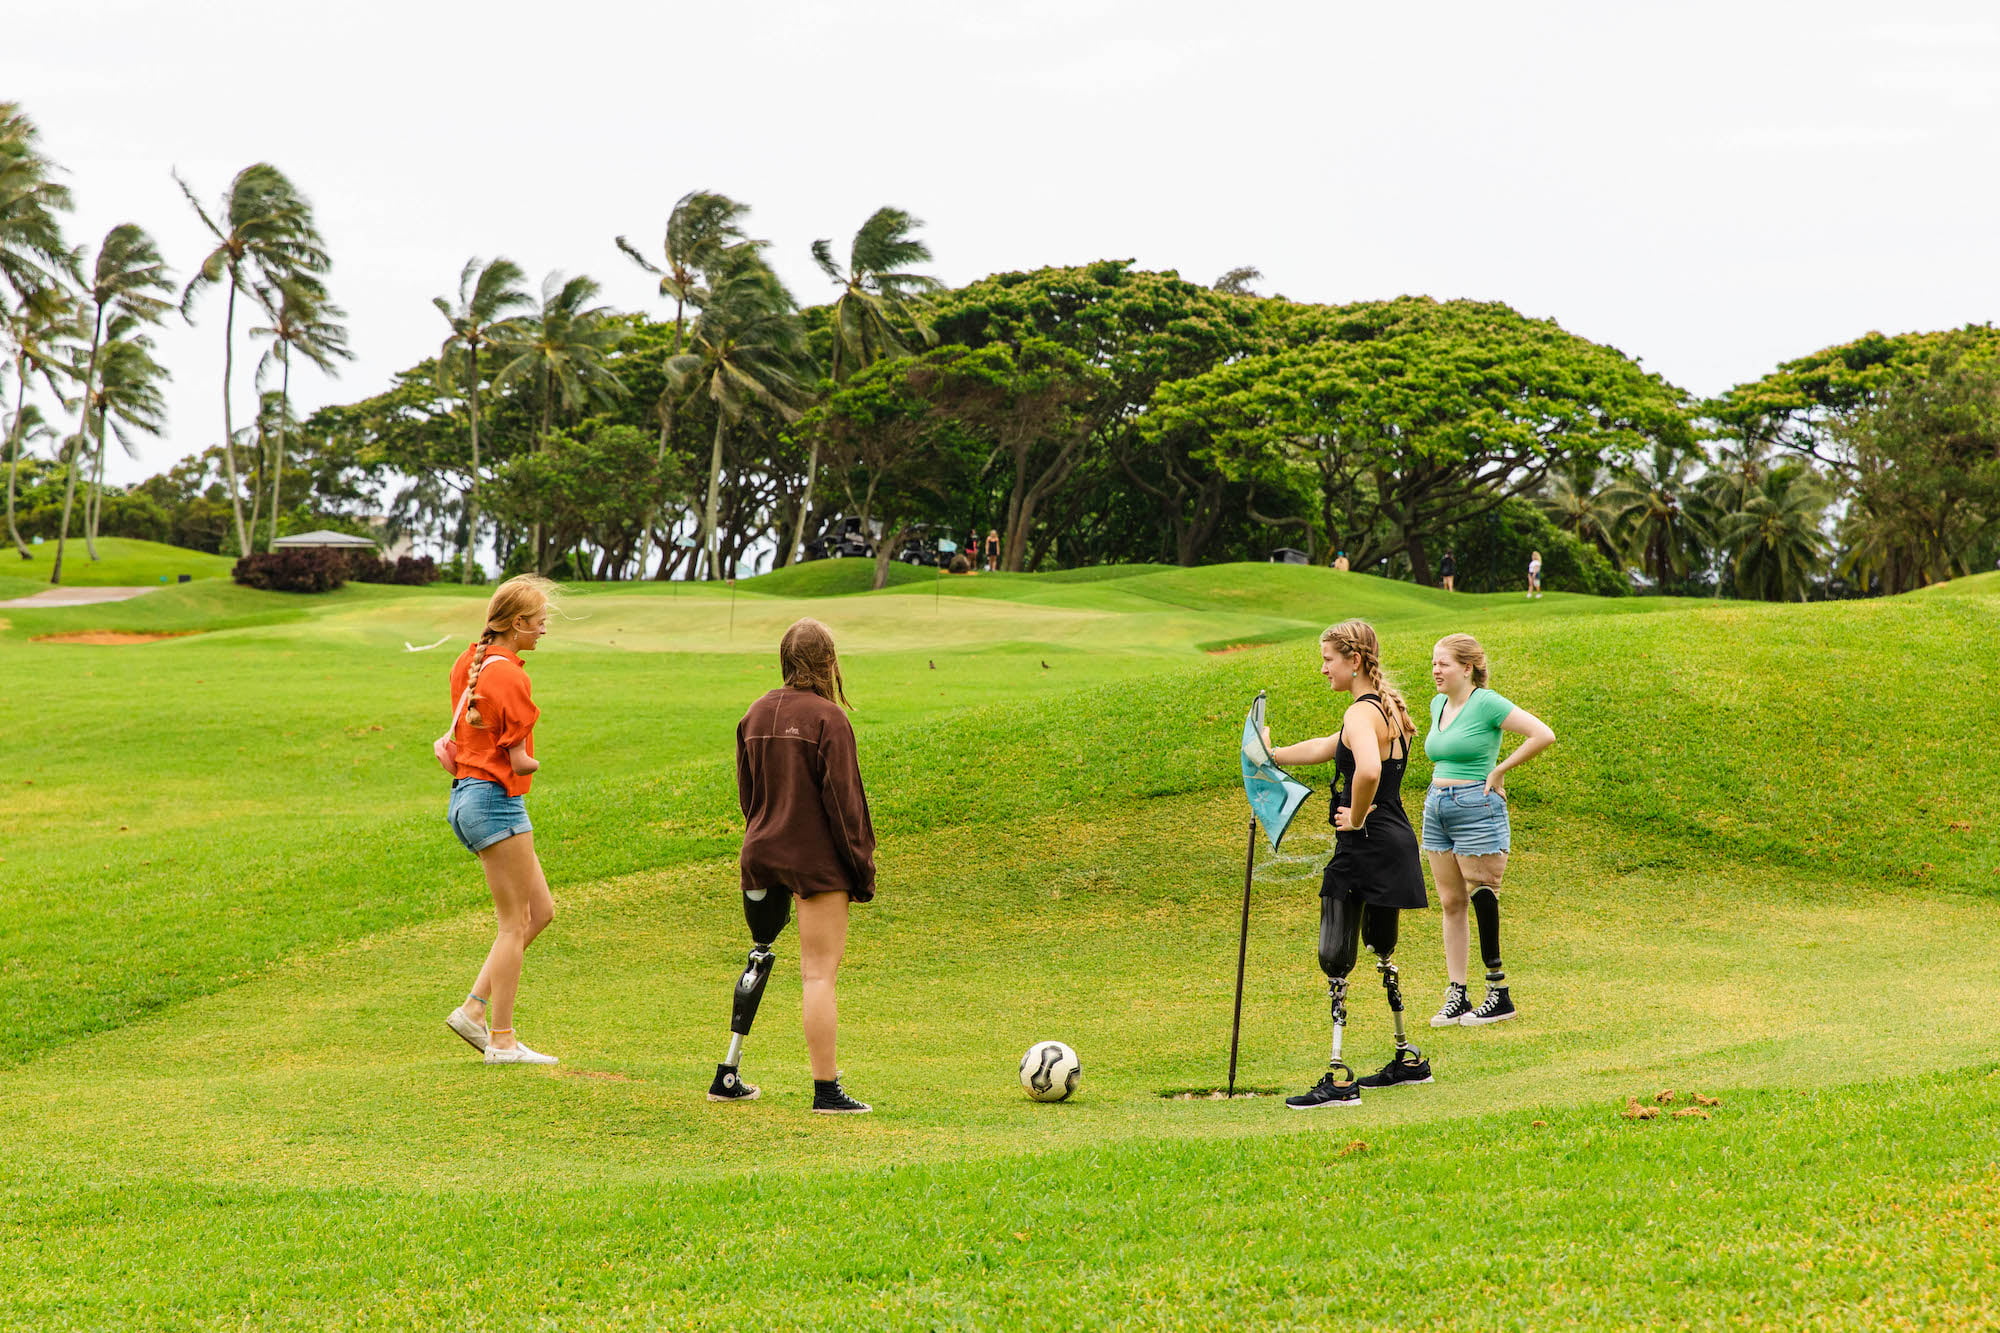 Attendees playing footgolf